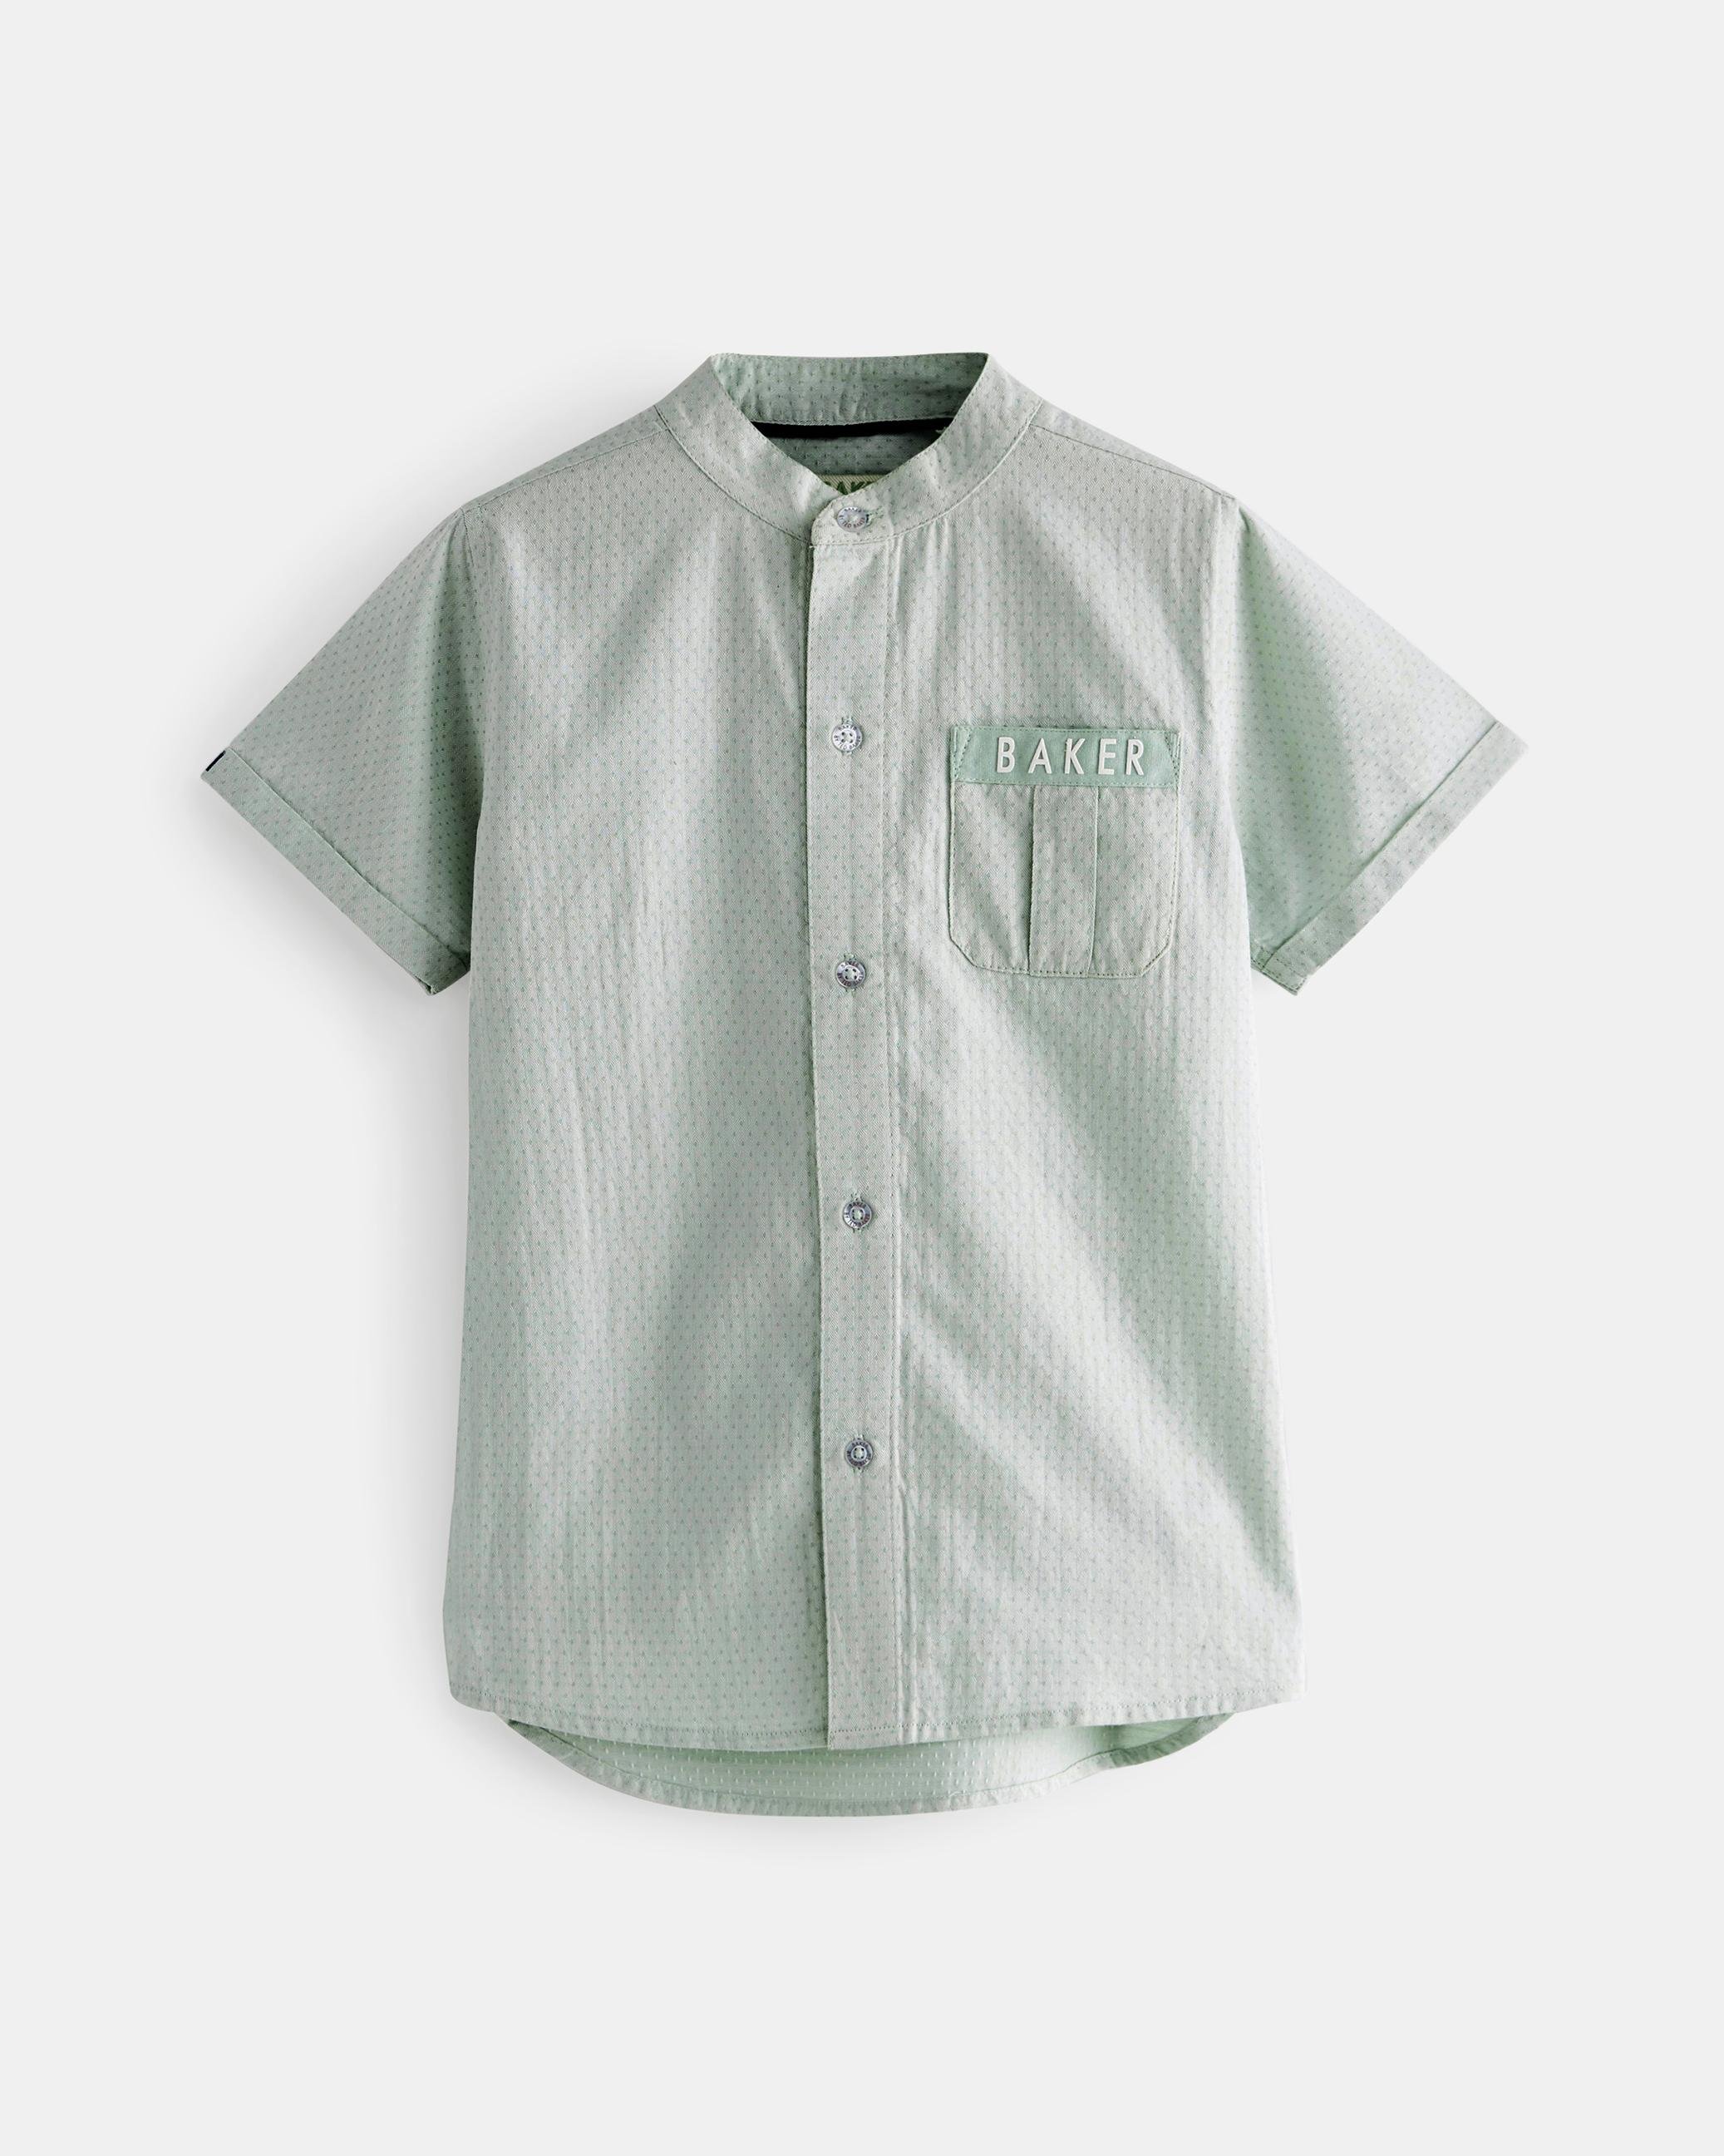 N32406 YB1 Short Sleeve Shirt - COSTICA - Green by TED BAKER